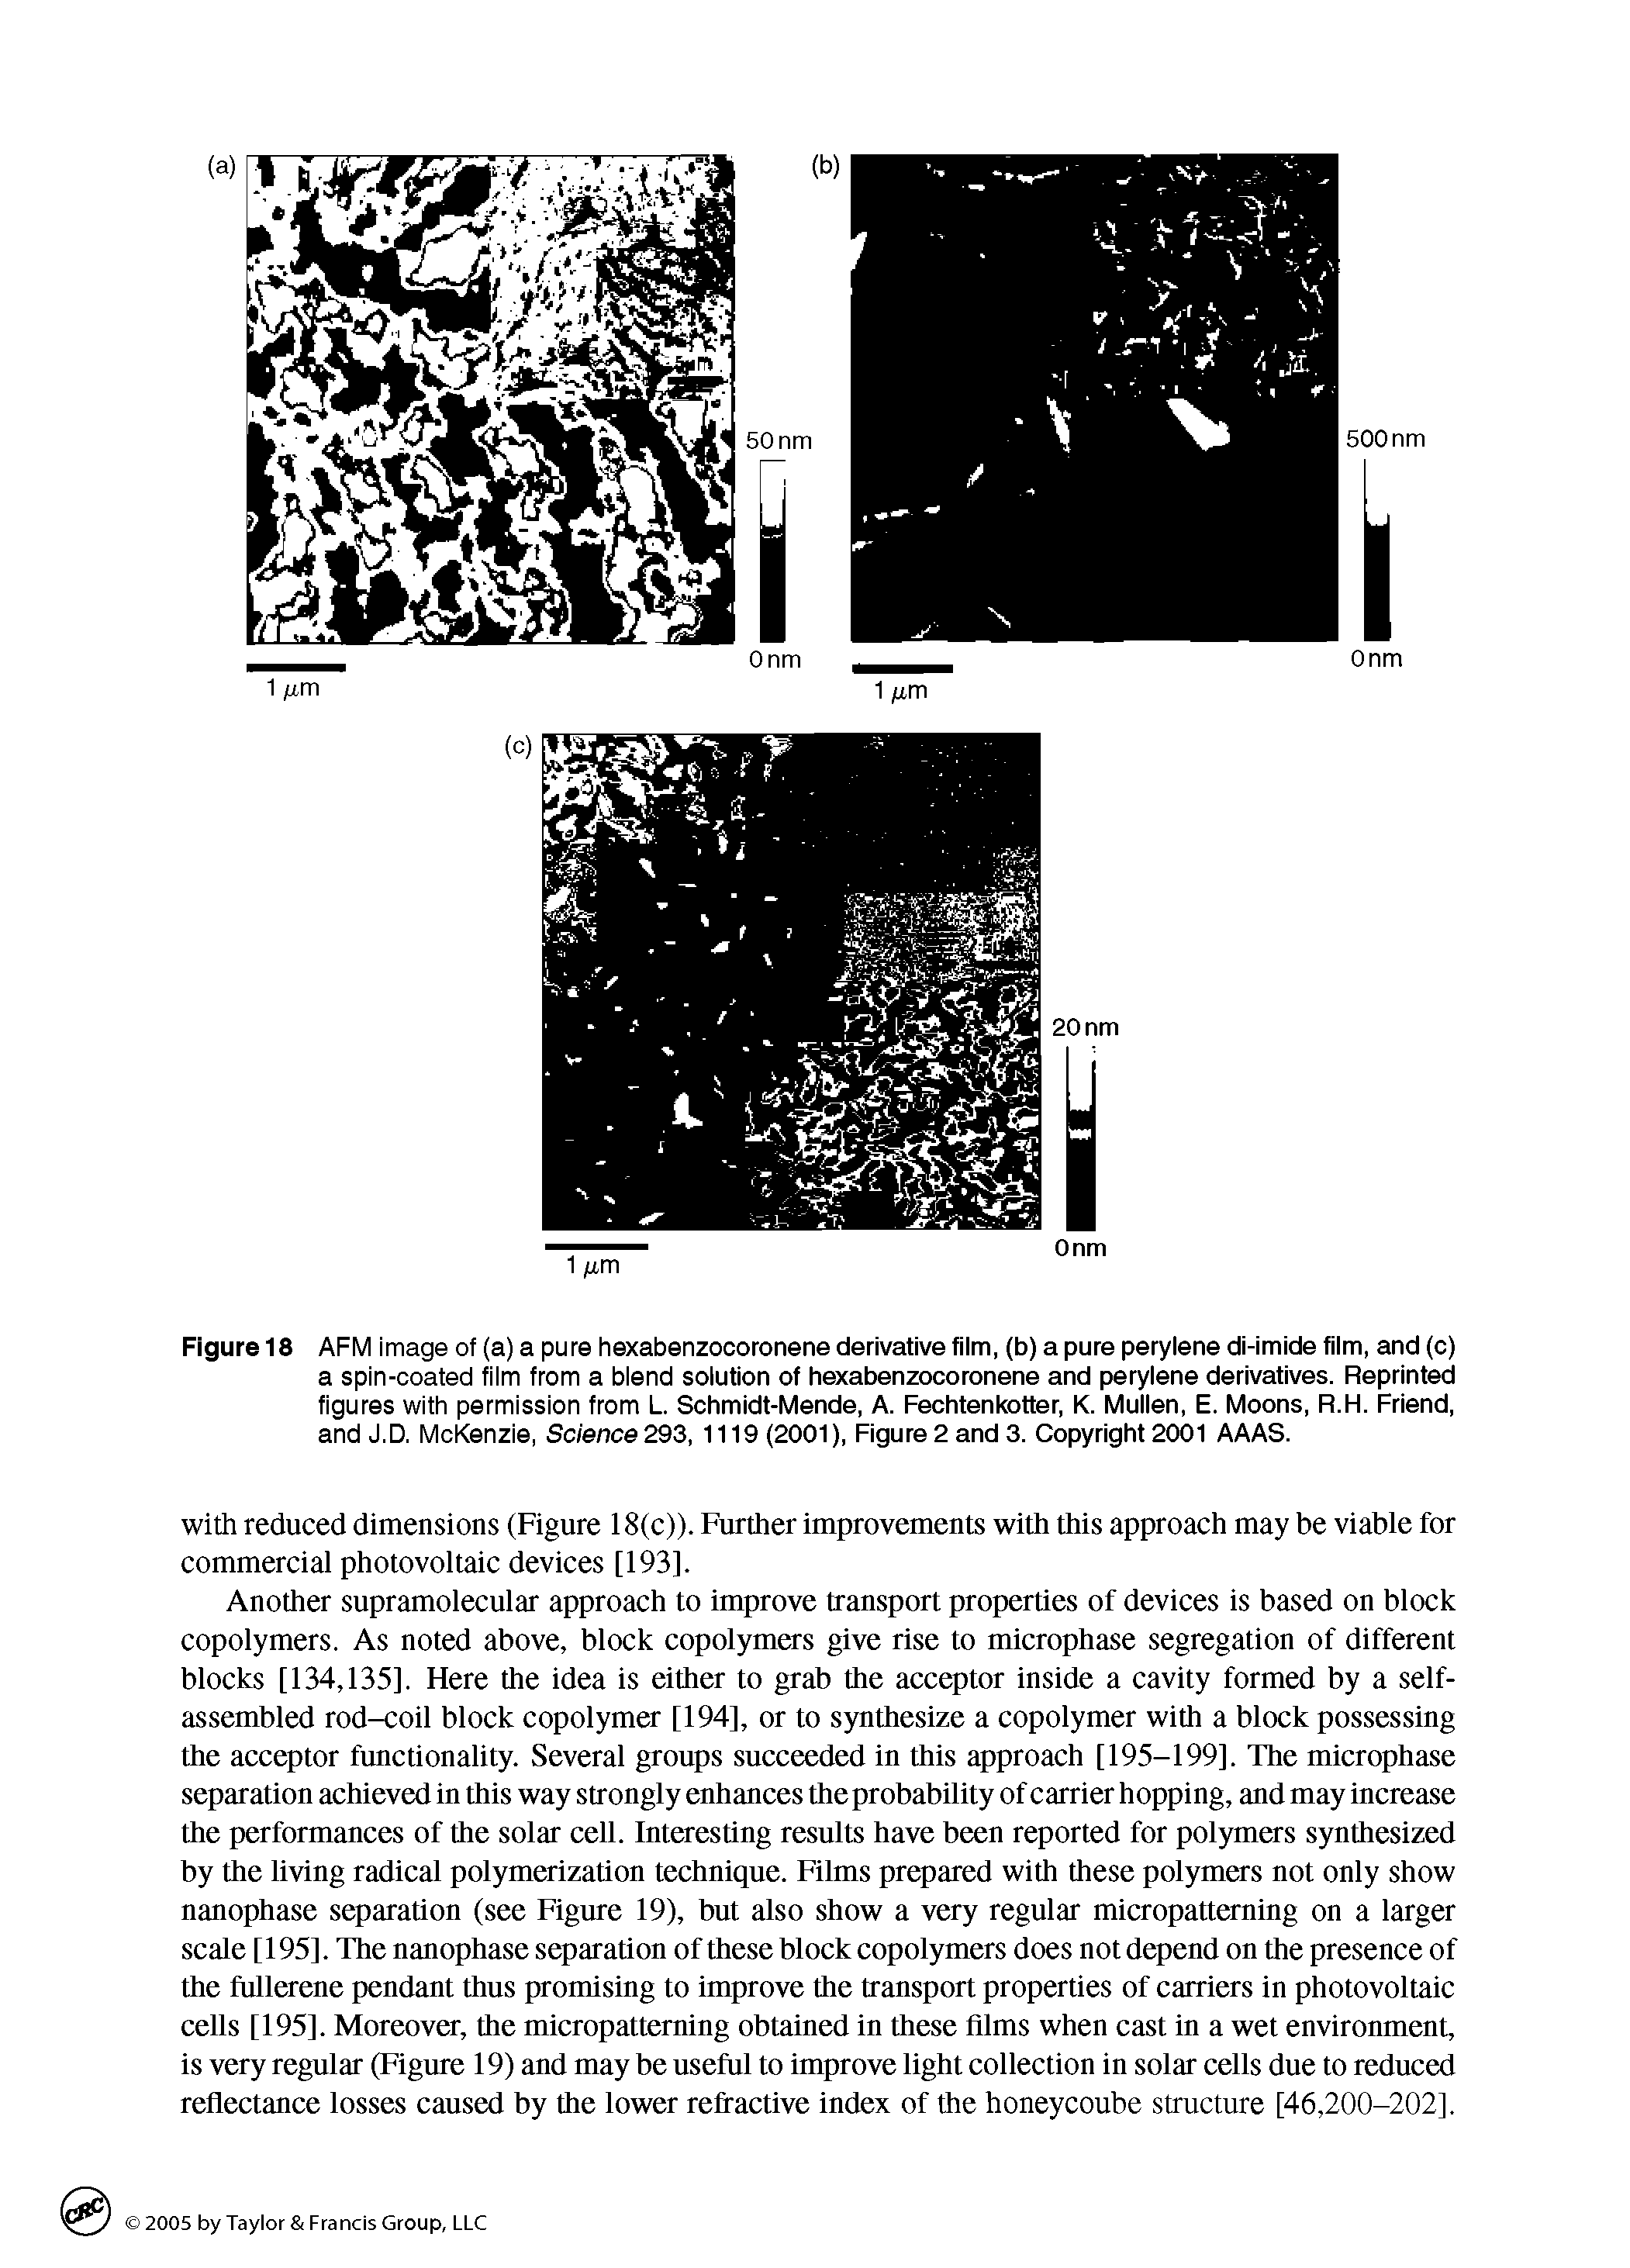 Figure 18 AFM image of (a) a pure hexabenzocoronene derivative fiim, (b) a pure perylene di-imide film, and (c) a spin-coated fiim from a biend soiution of hexabenzocoronene and perylene derivatives. Reprinted figures with permission from L. Schmidt-Mende, A. Fechtenkotter, K. Mullen, E. Moons, R.H. Friend, and J.D. McKenzie, Sc/ ence 293, 1119(2001), Figure2and3. Copyright 2001 AAAS.